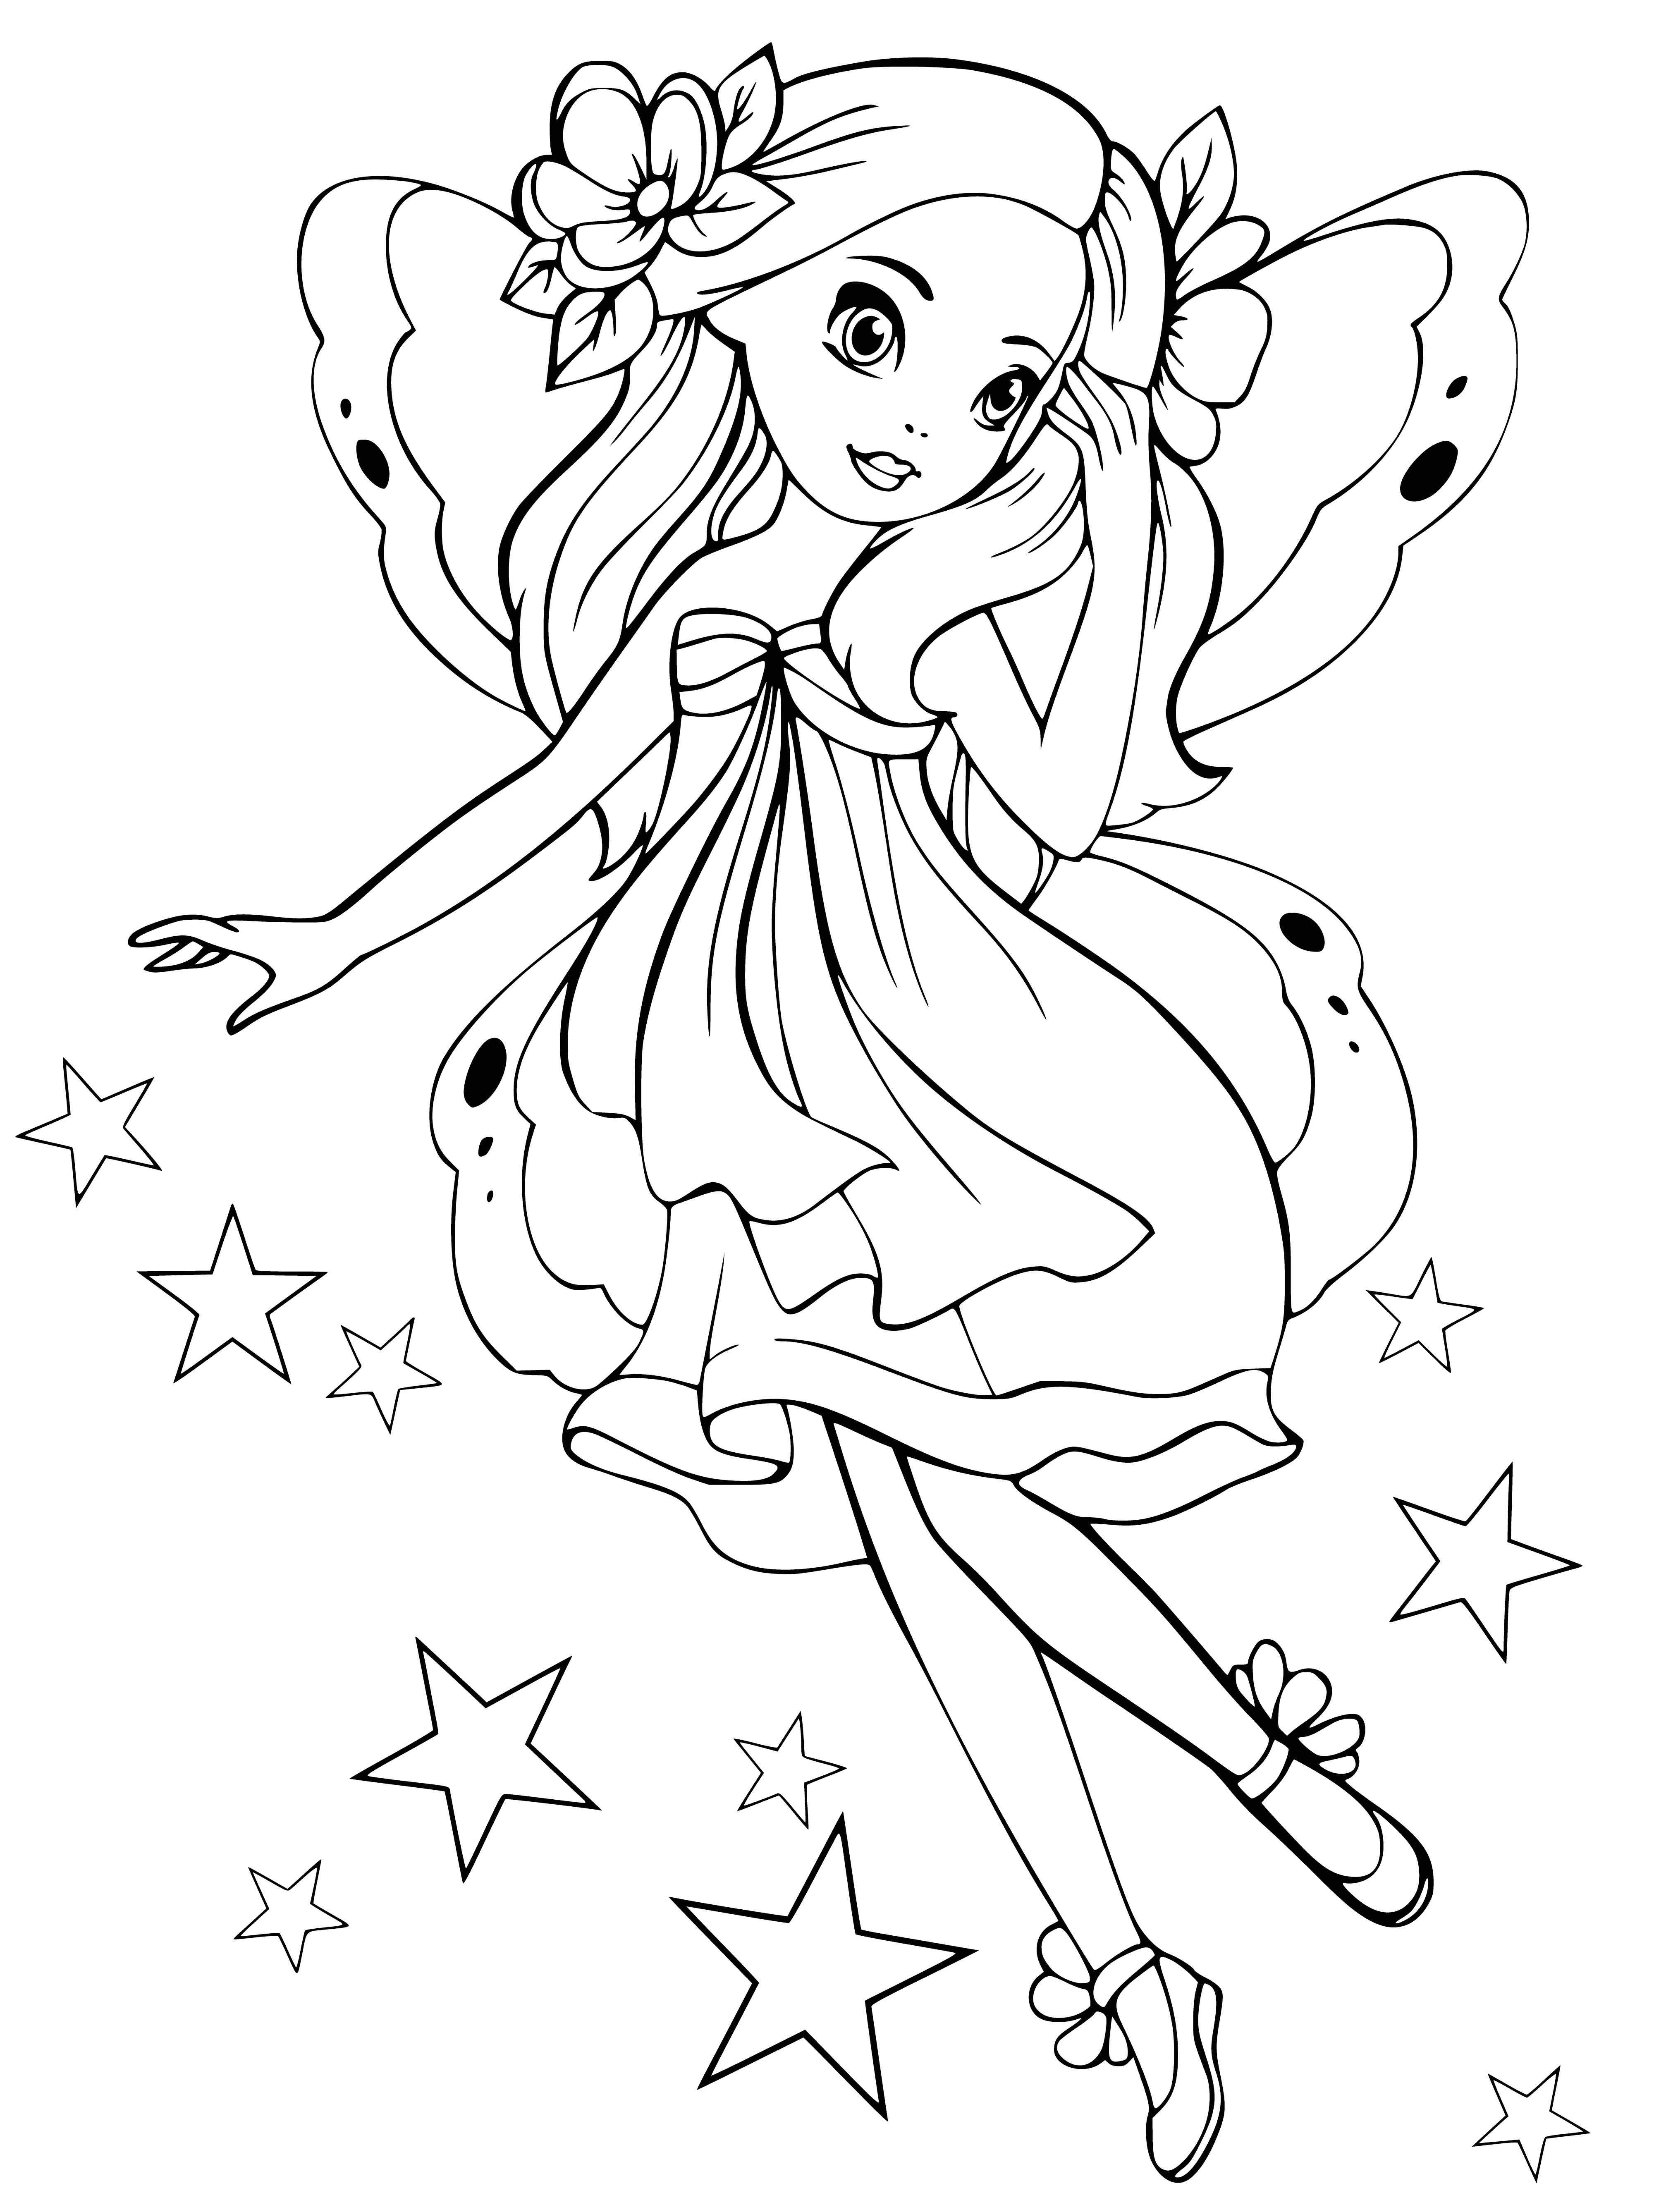 The flight of fairies coloring page